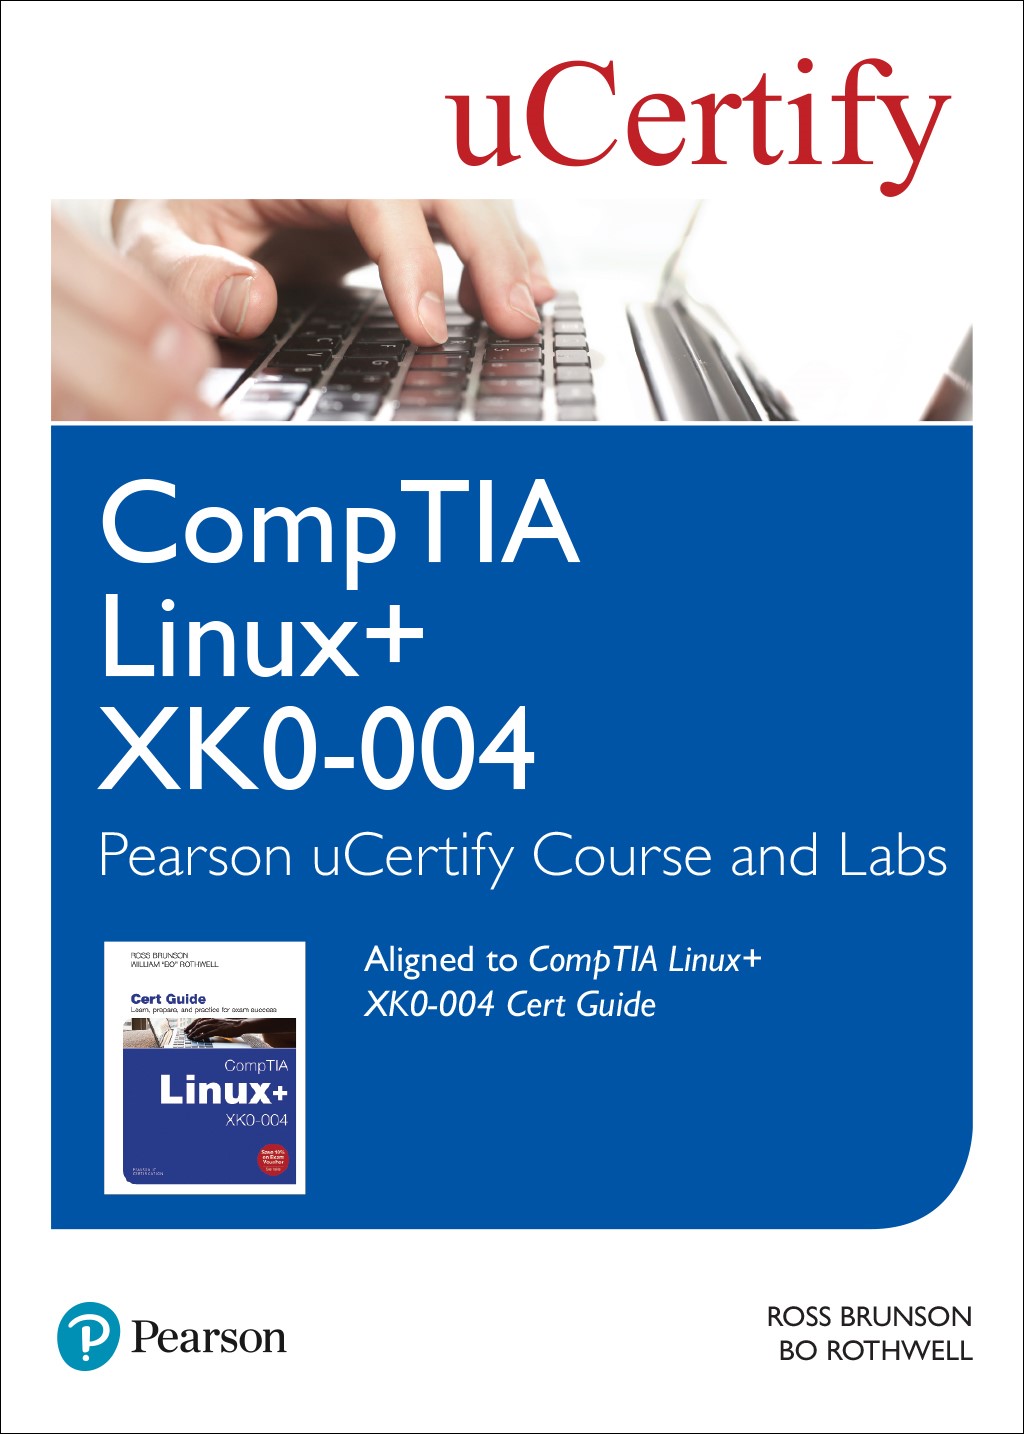 CompTIA Linux+ XK0-004 Cert Guide Pearson uCertify Course and Labs Access Code Card